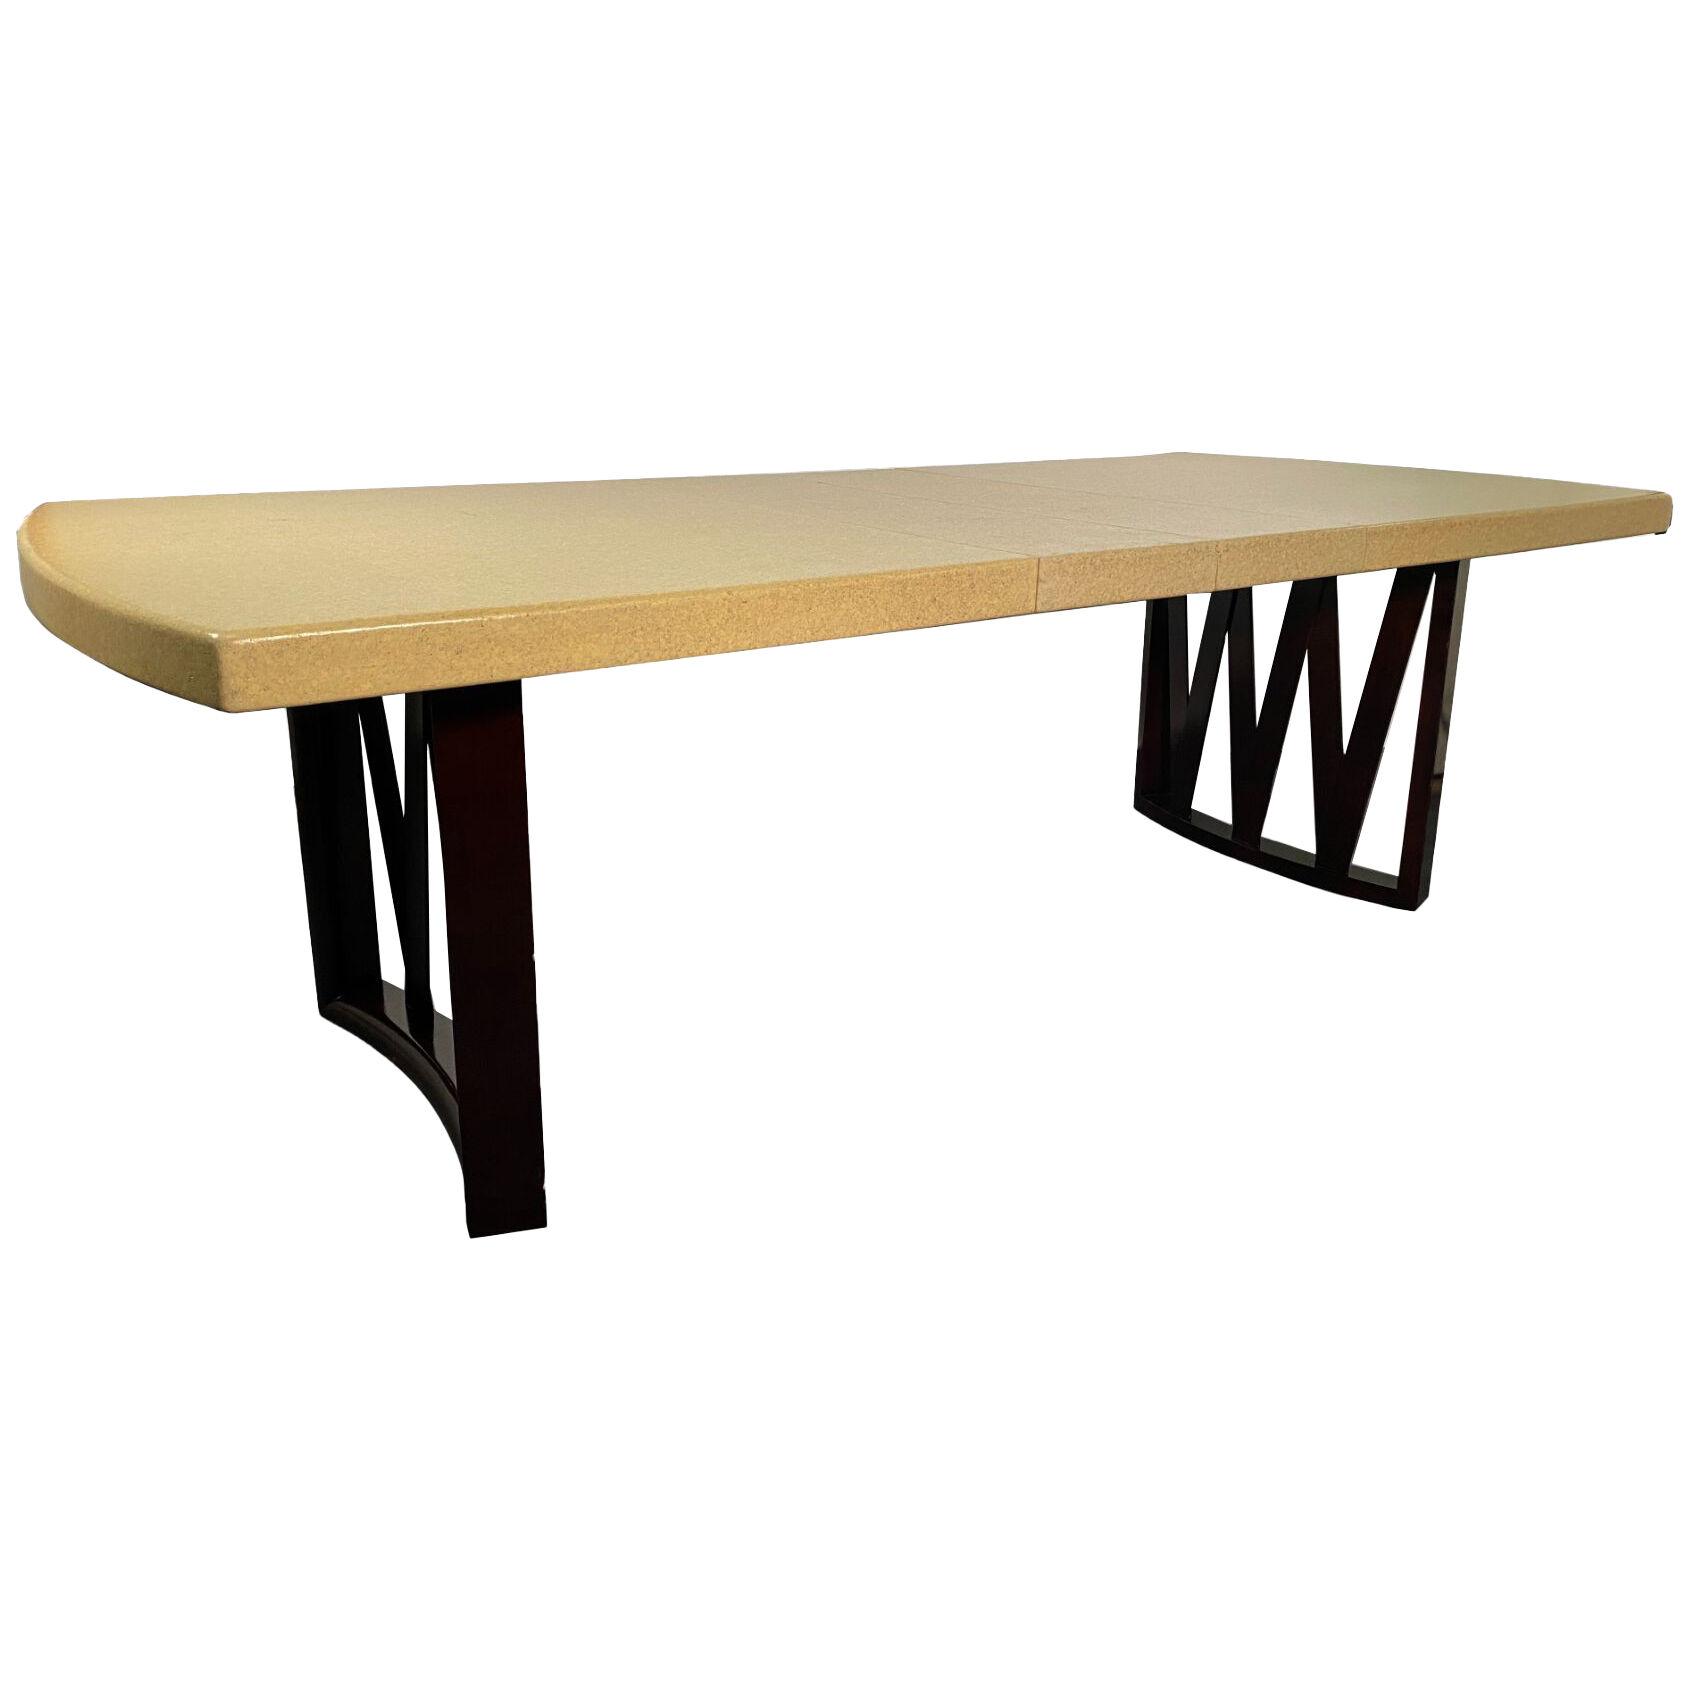 American Modern Mahogany & Cork Top Extension Dining Table, Paul Frankl